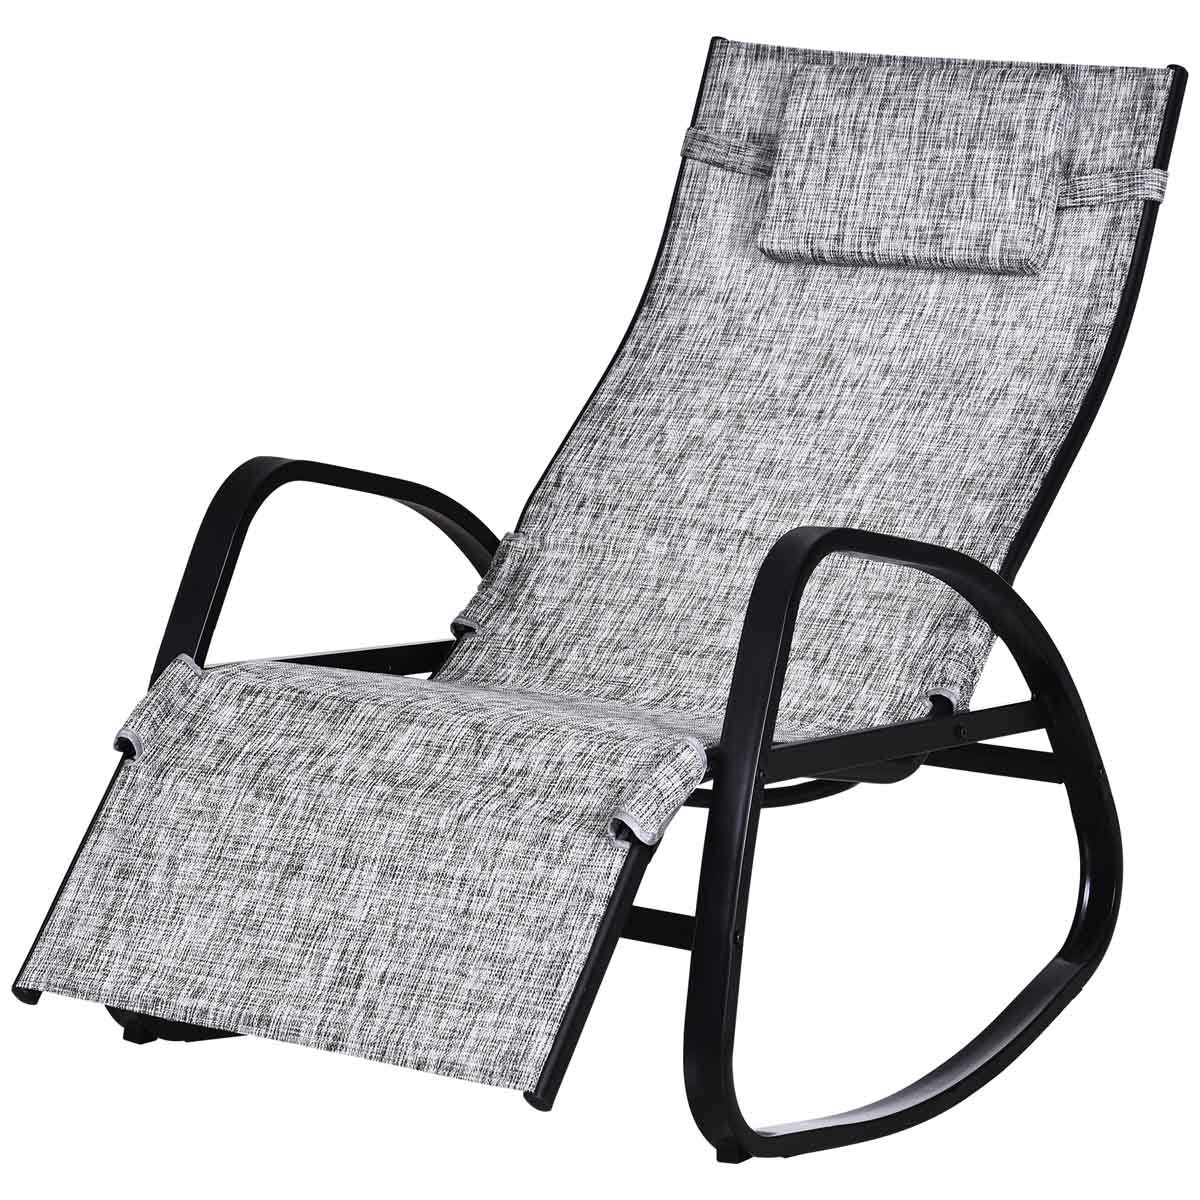 Outsunny Patio Adjust Lounge Chair w/ Footrest- Grey